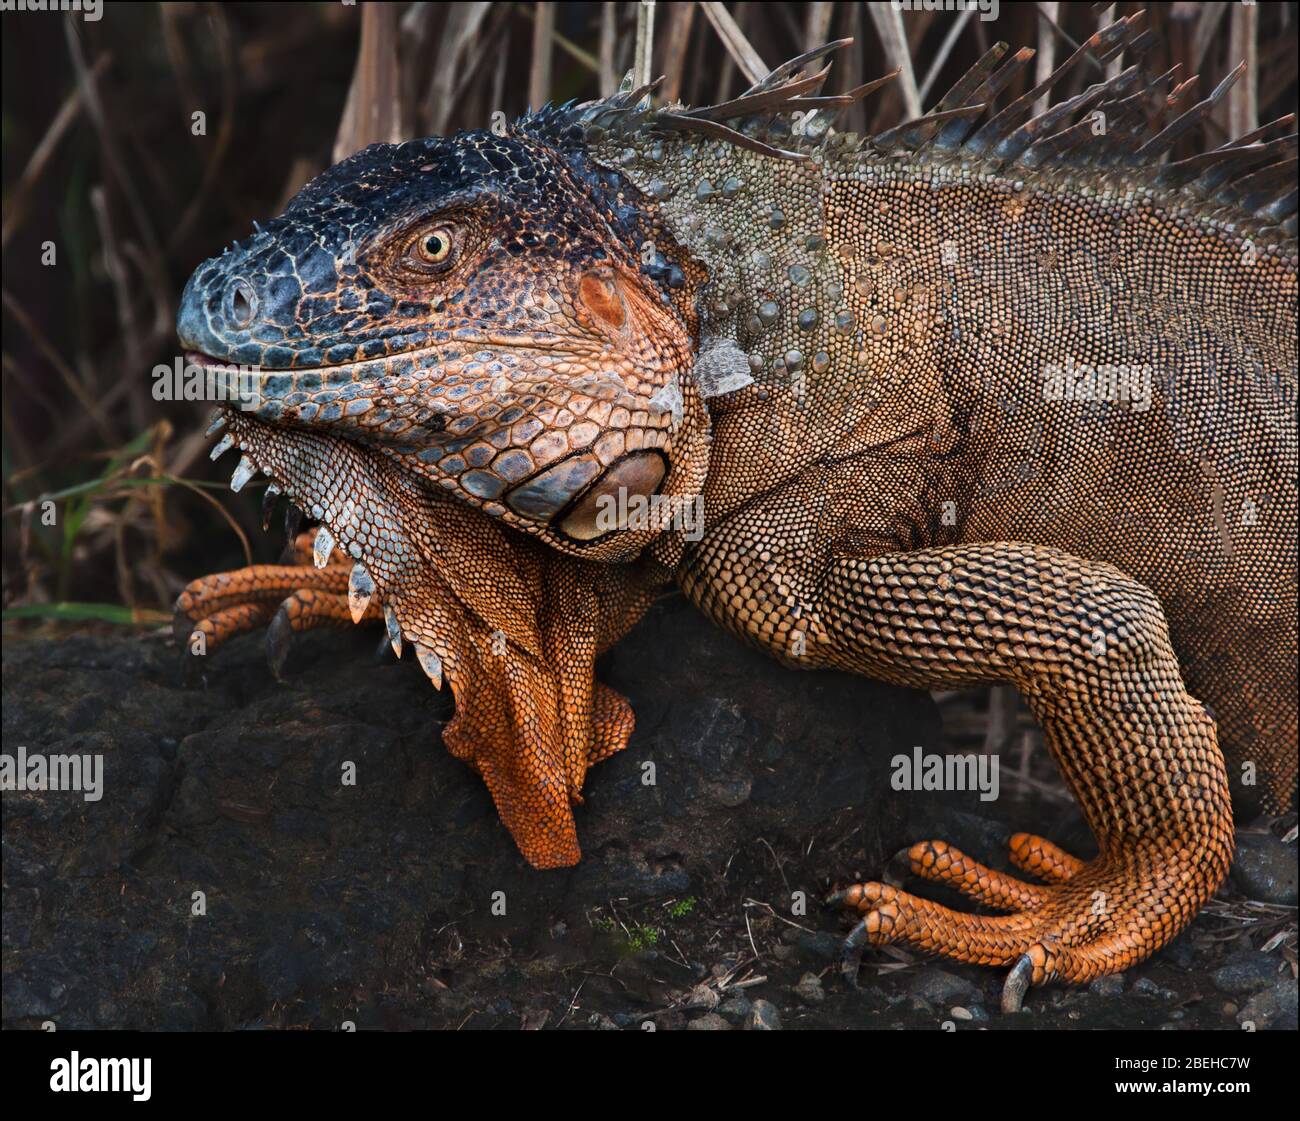 Green Iguana walking in the rainforest in Costa Rica. Orange with scaly skin and big eyes. Stock Photo